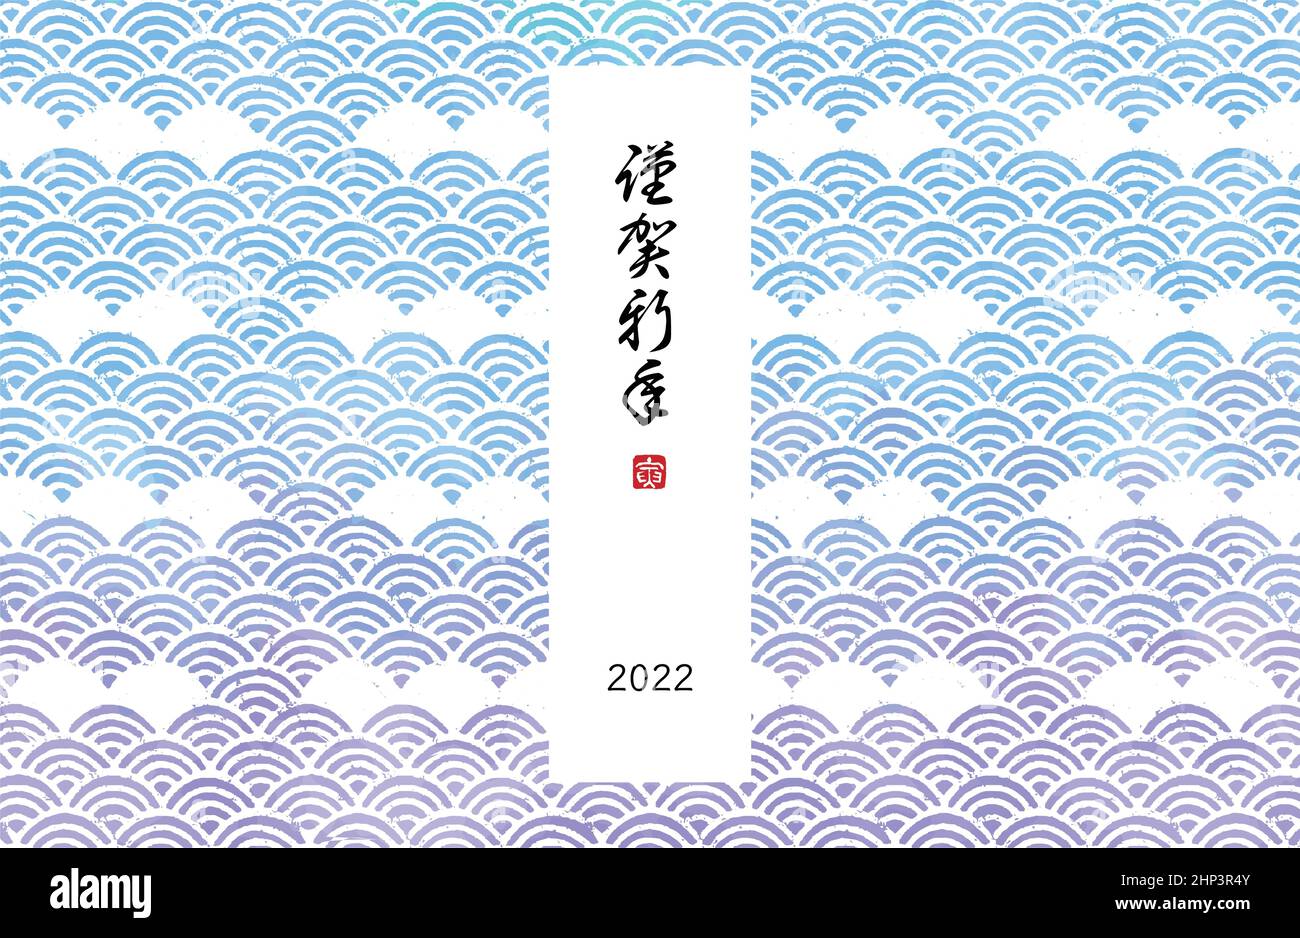 Japanese style wave pattern New Year’s card for year 2022 Stock Vector